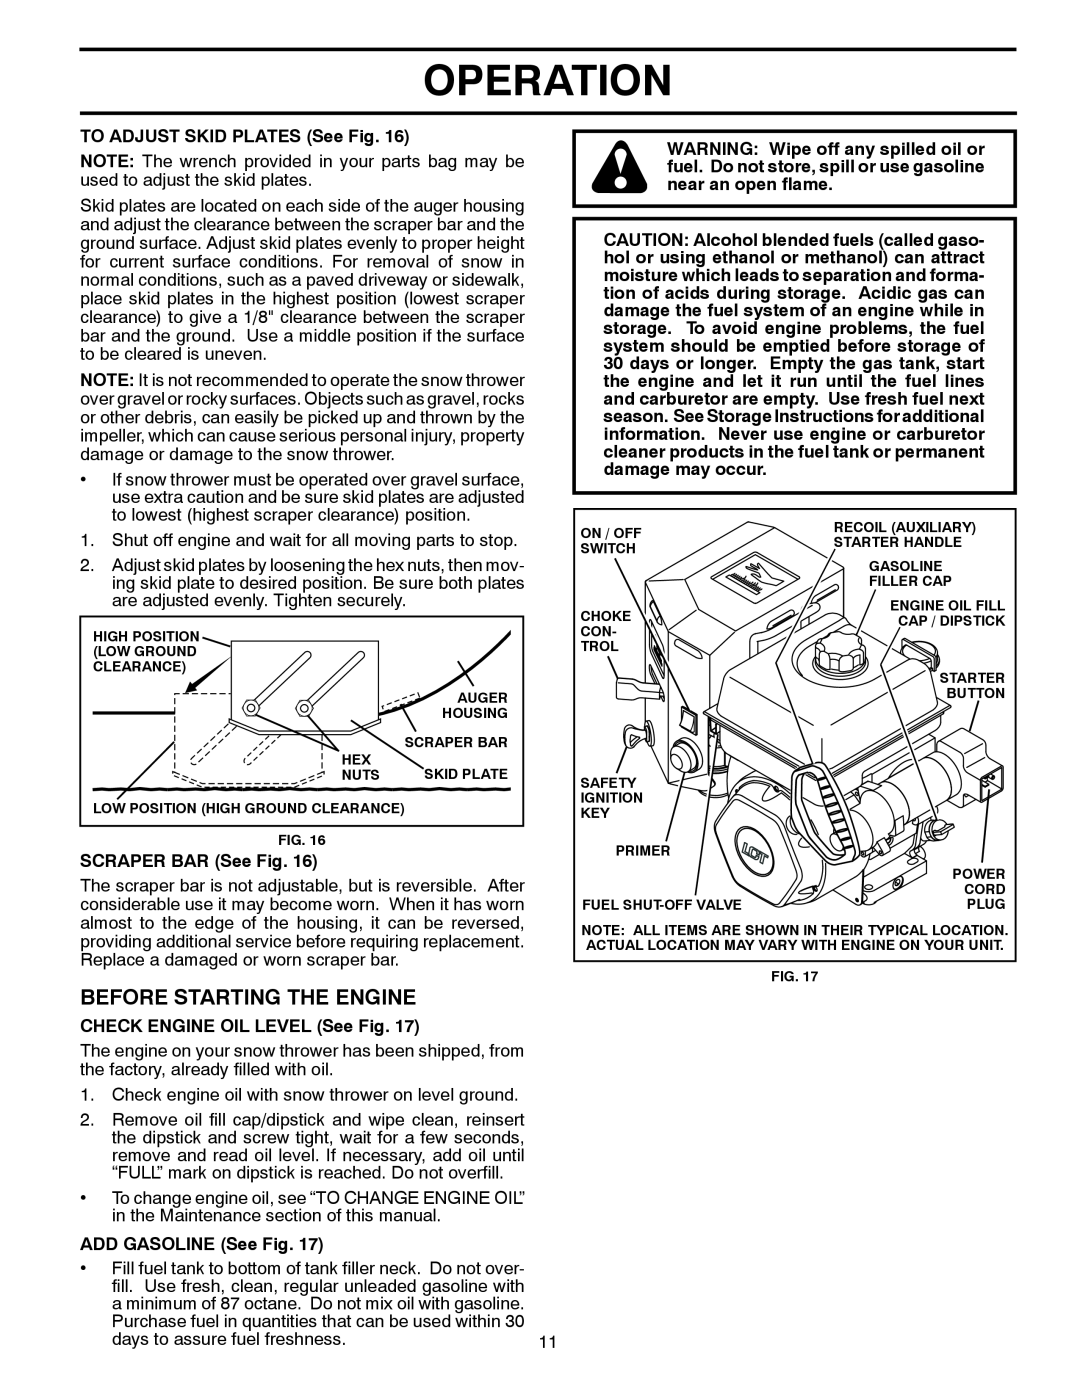 Poulan 96198002601 Before Starting The Engine, Operation, TO ADJUST SKID PLATES See Fig, used to adjust the skid plates 